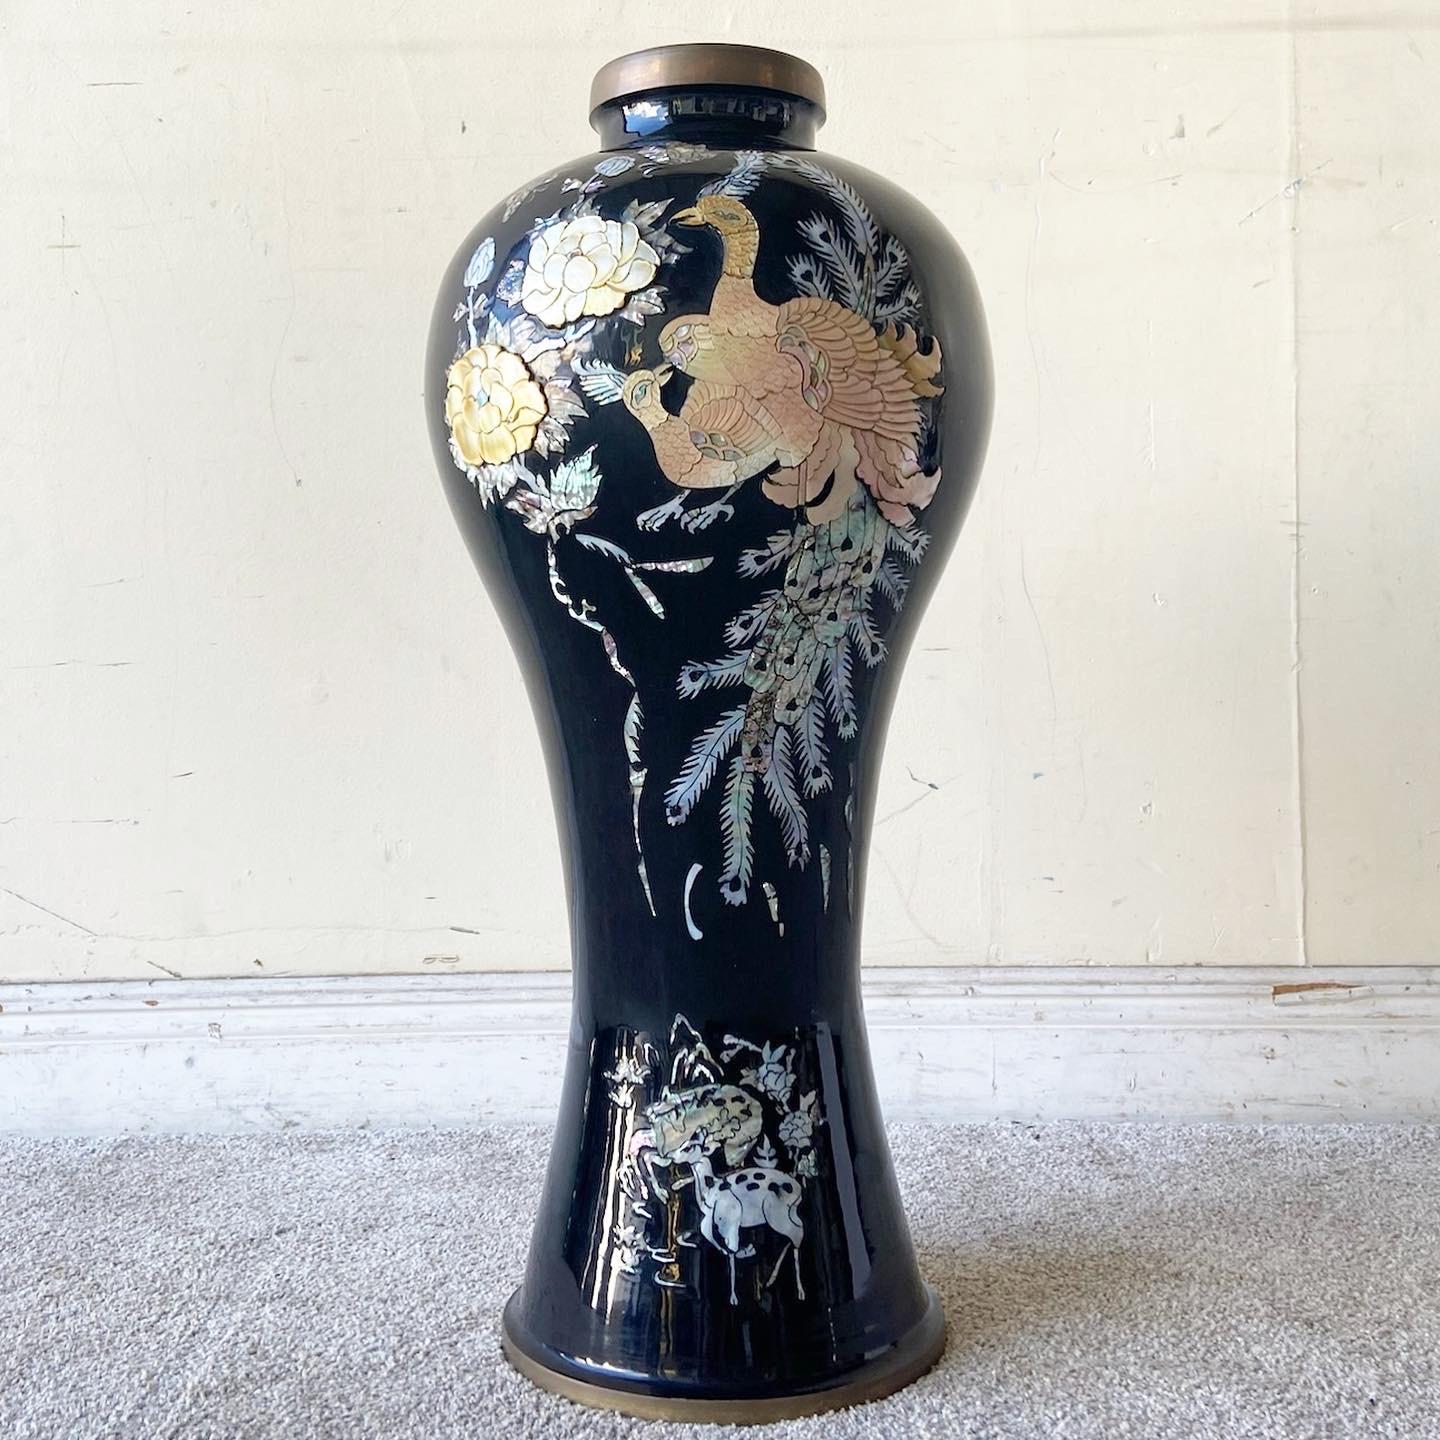 Exceptional vintage chinoiserie brass floor vase. Features a black lacquered finish with an intricate mother of Pearl arrangement depicting peacock birds and flowers. 